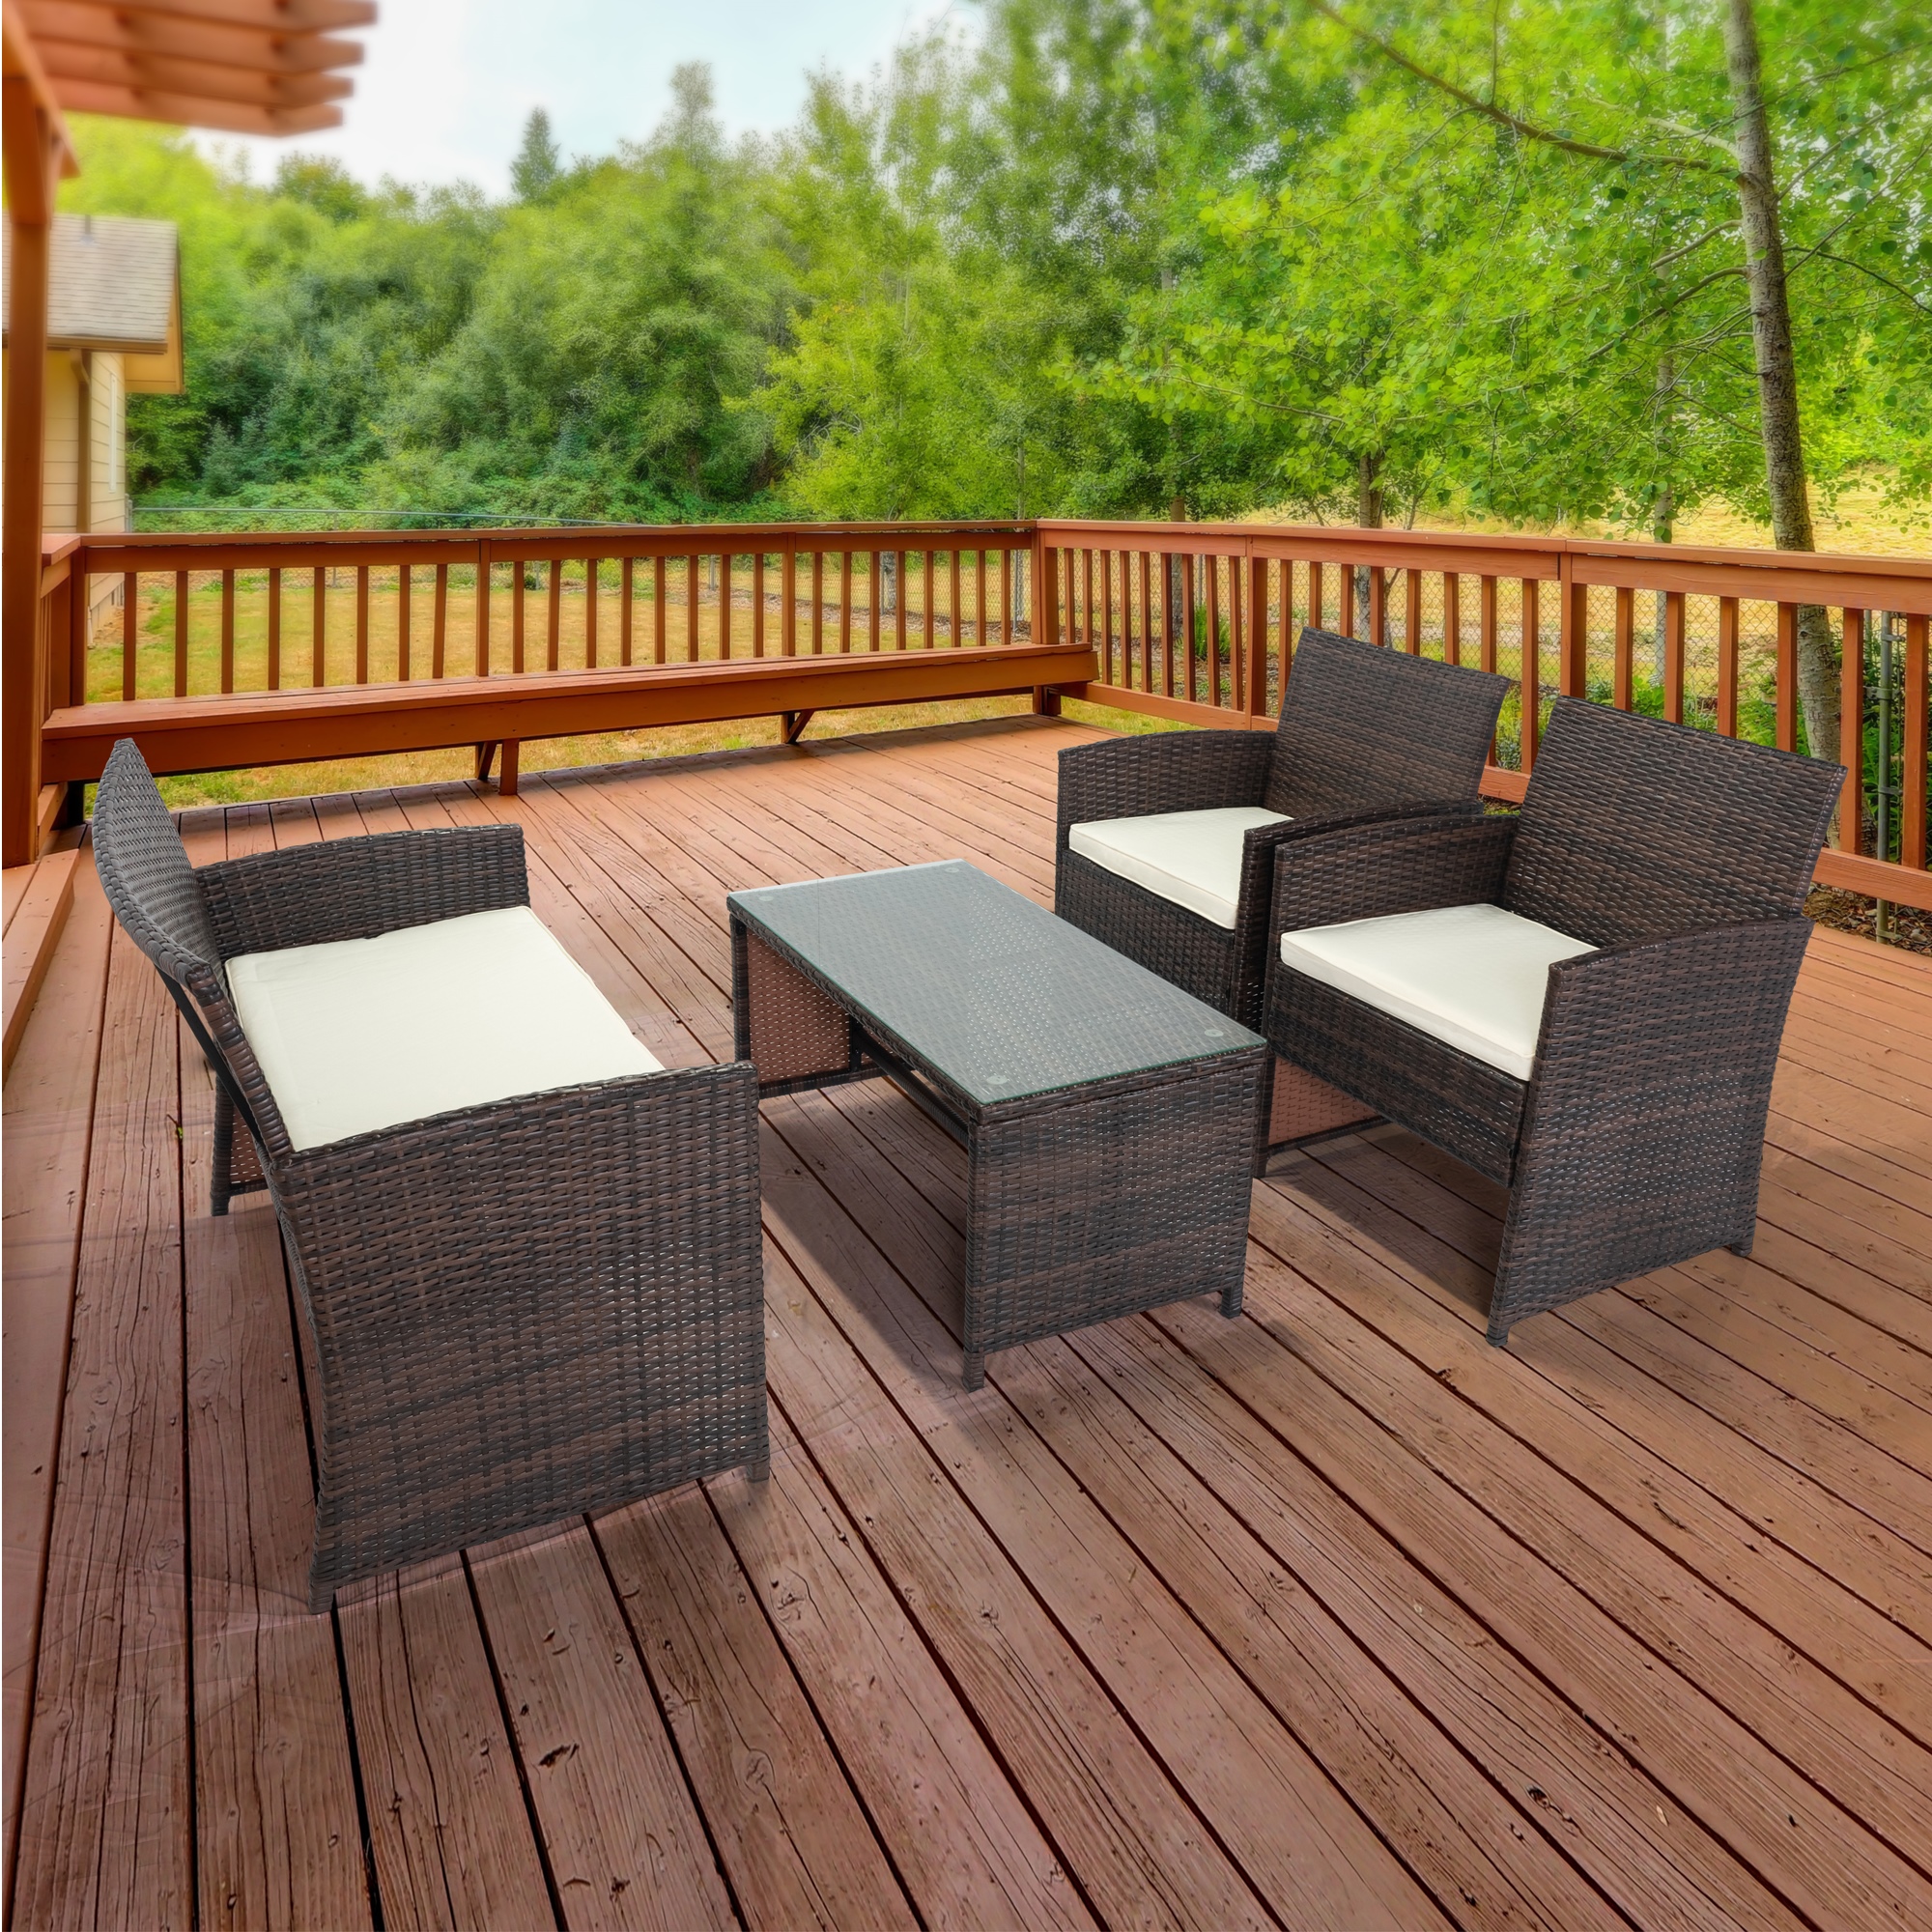 4 Pcs Outdoor Patio Furniture All-Weather Patio Conversation Set, Outdoor Rattan Sofas with Table Set, Patio Furniture Set with Soft Cushions & Tempered Glass Coffee Table - image 1 of 14